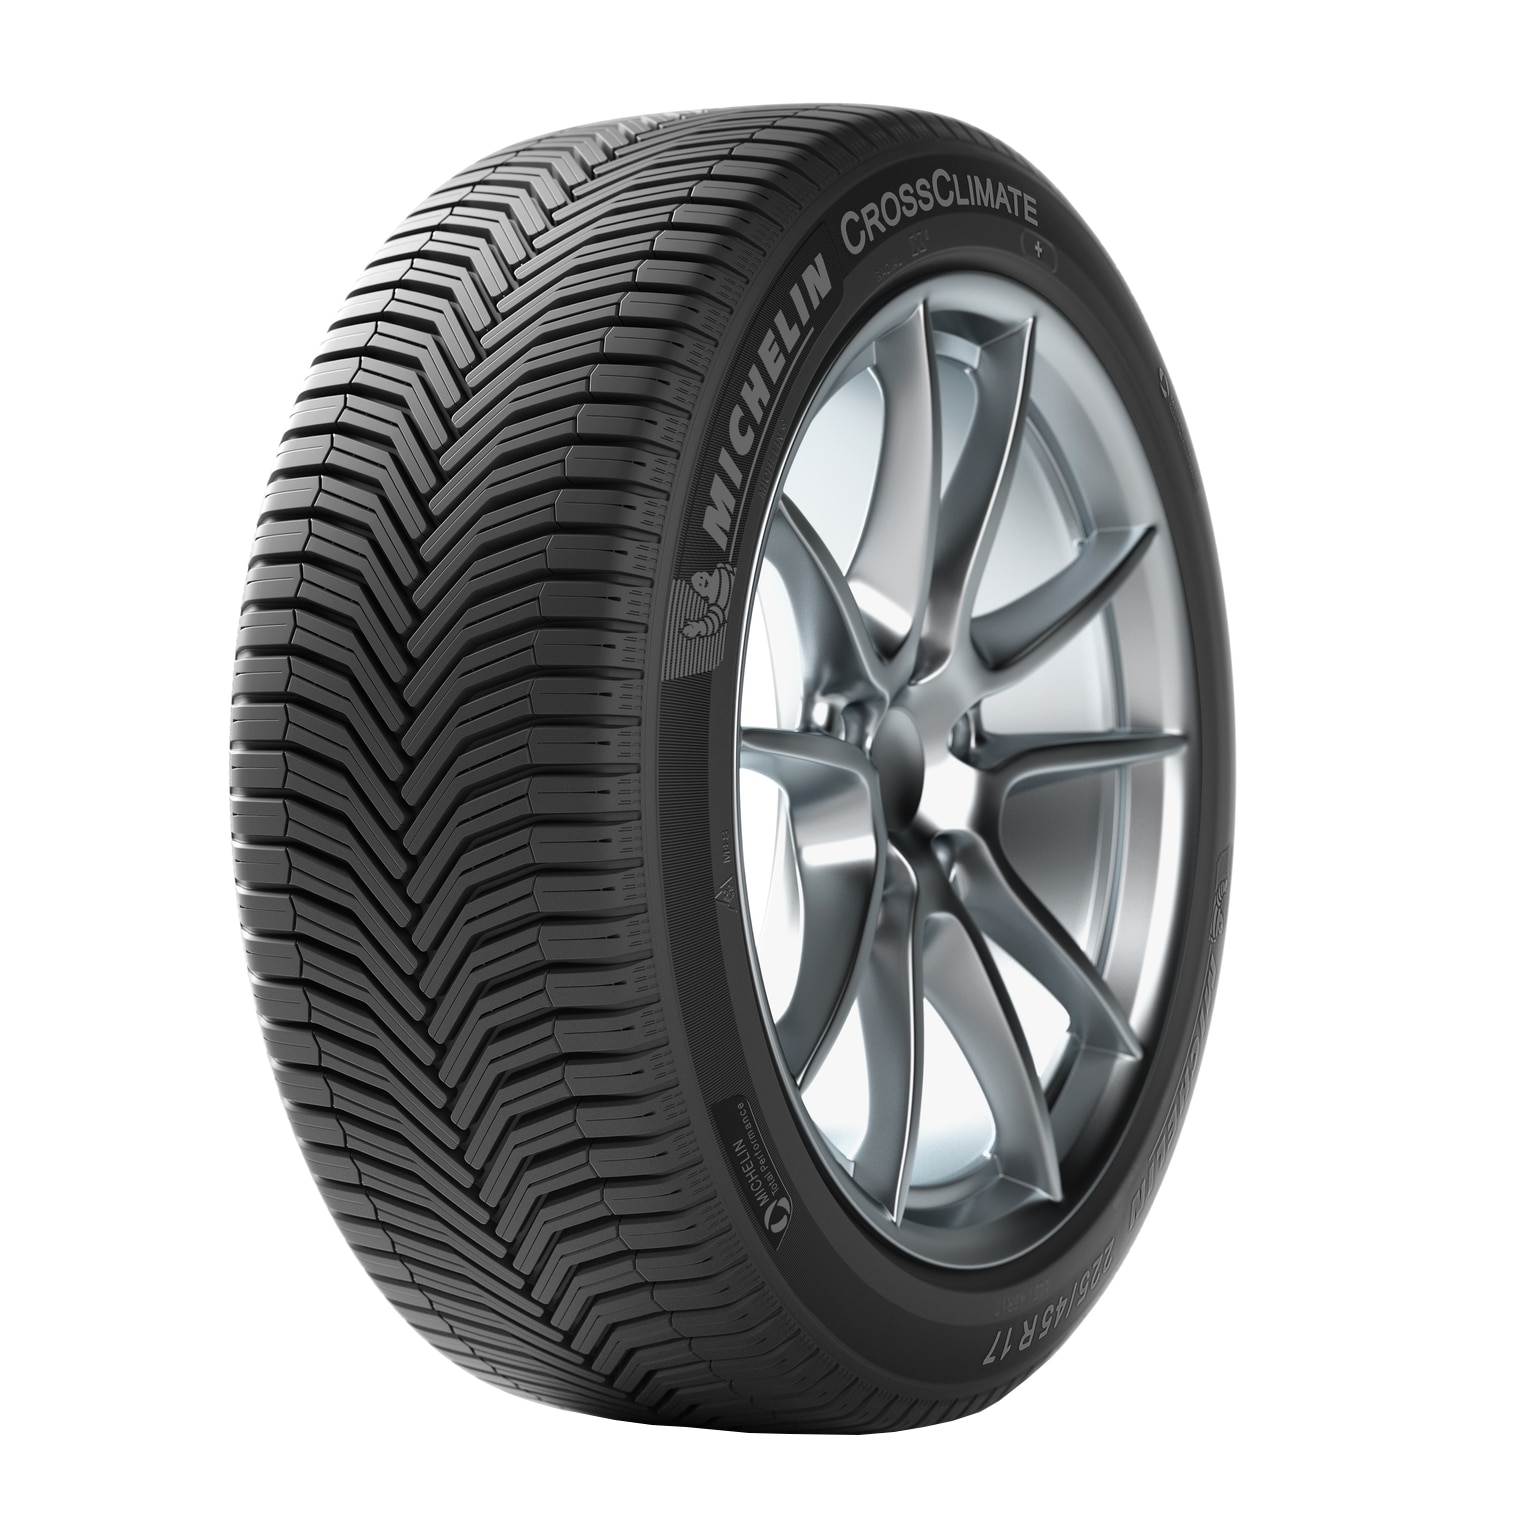 Simulate Converge Frank Anvelopa all season Michelin CrossClimate+ 225/40 R18 92Y XL - eMAG.ro